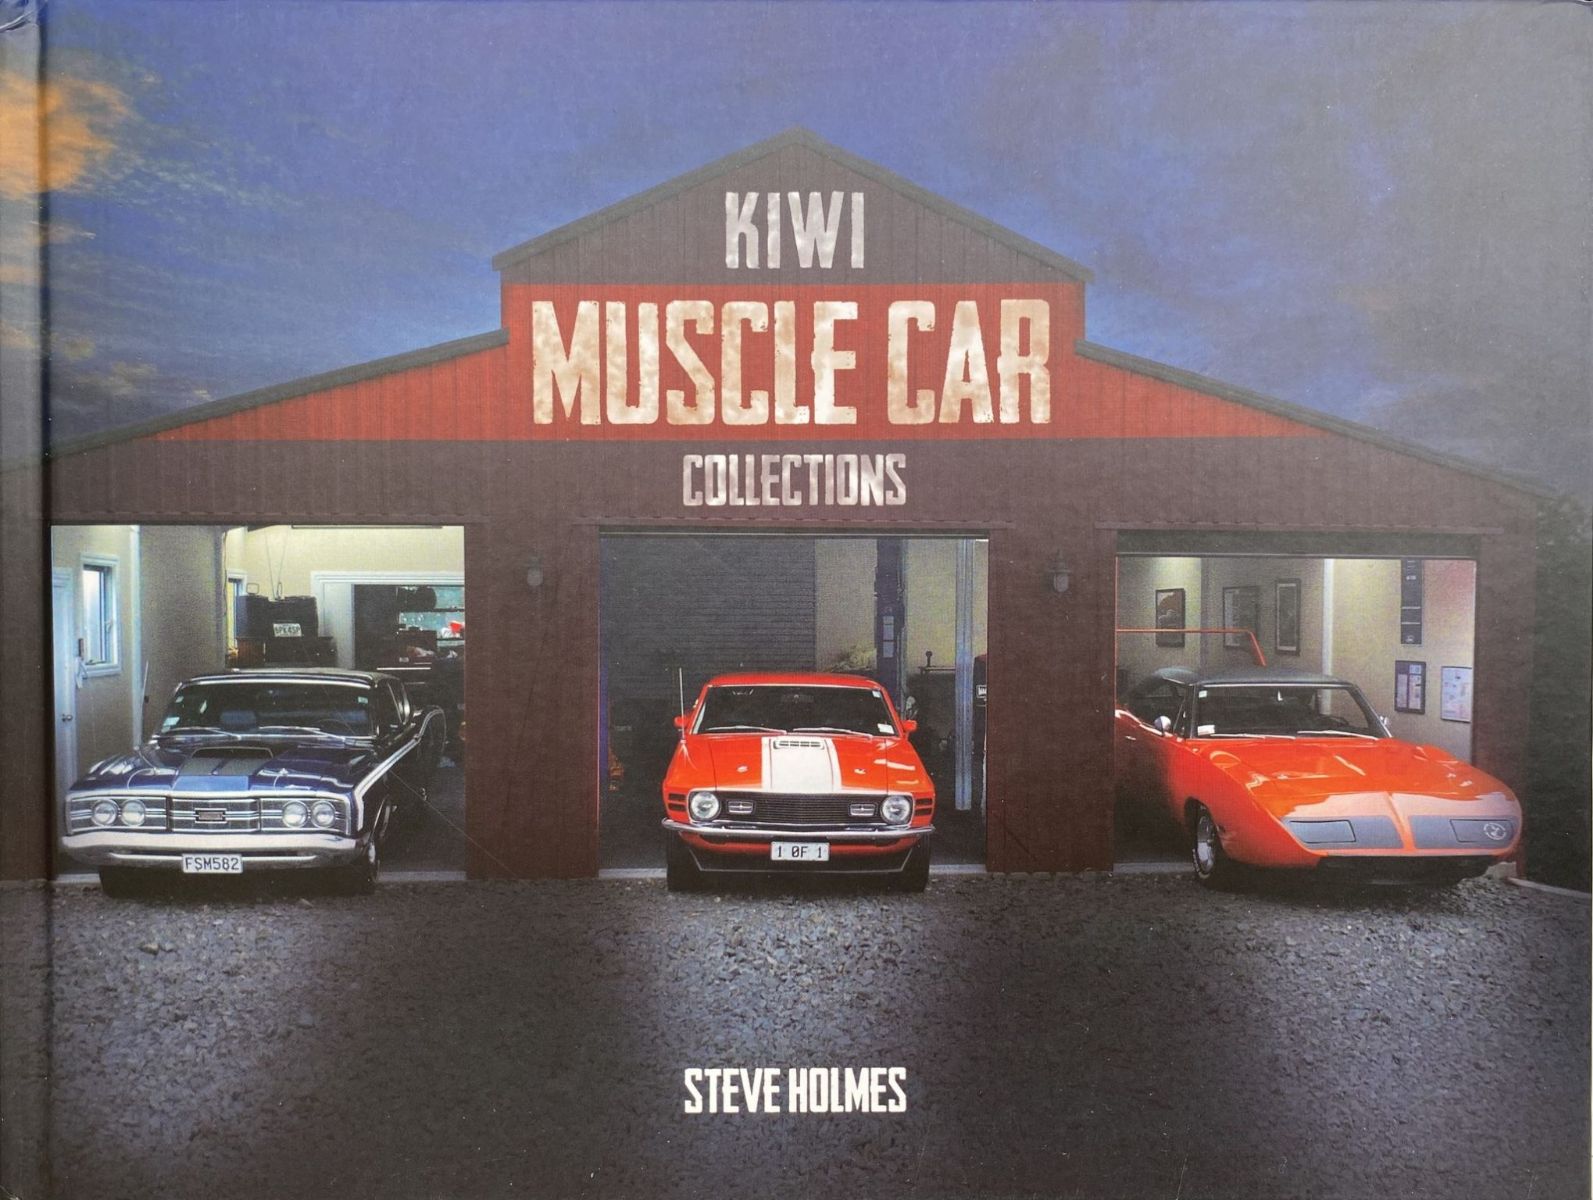 KIWI MUSCLE CAR COLLECTIONS